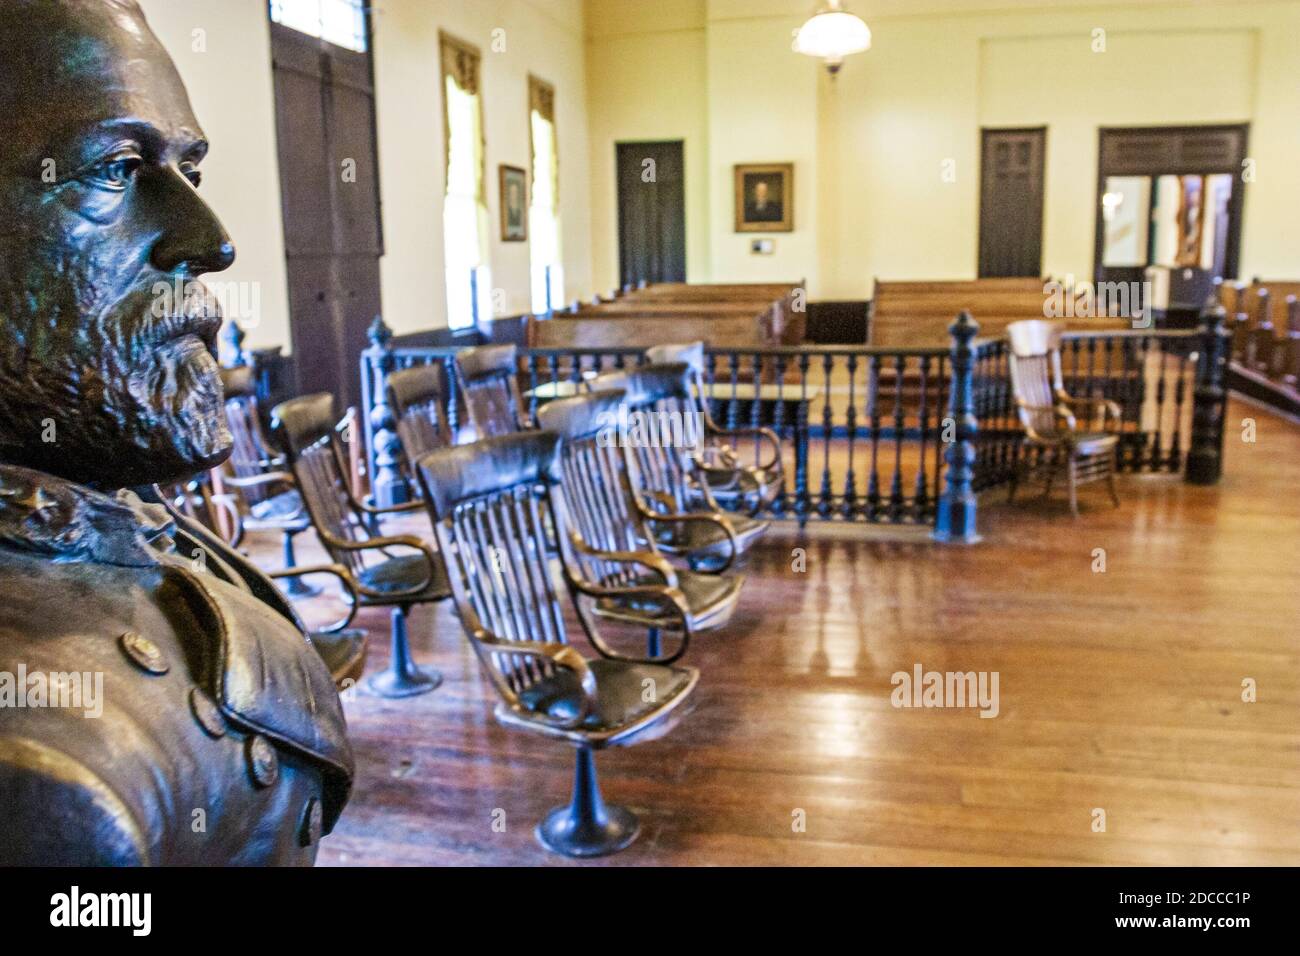 Mississippi Vicksburg The Old Court House Museum,Robert E. Lee bust courtroom inside interior, Stock Photo